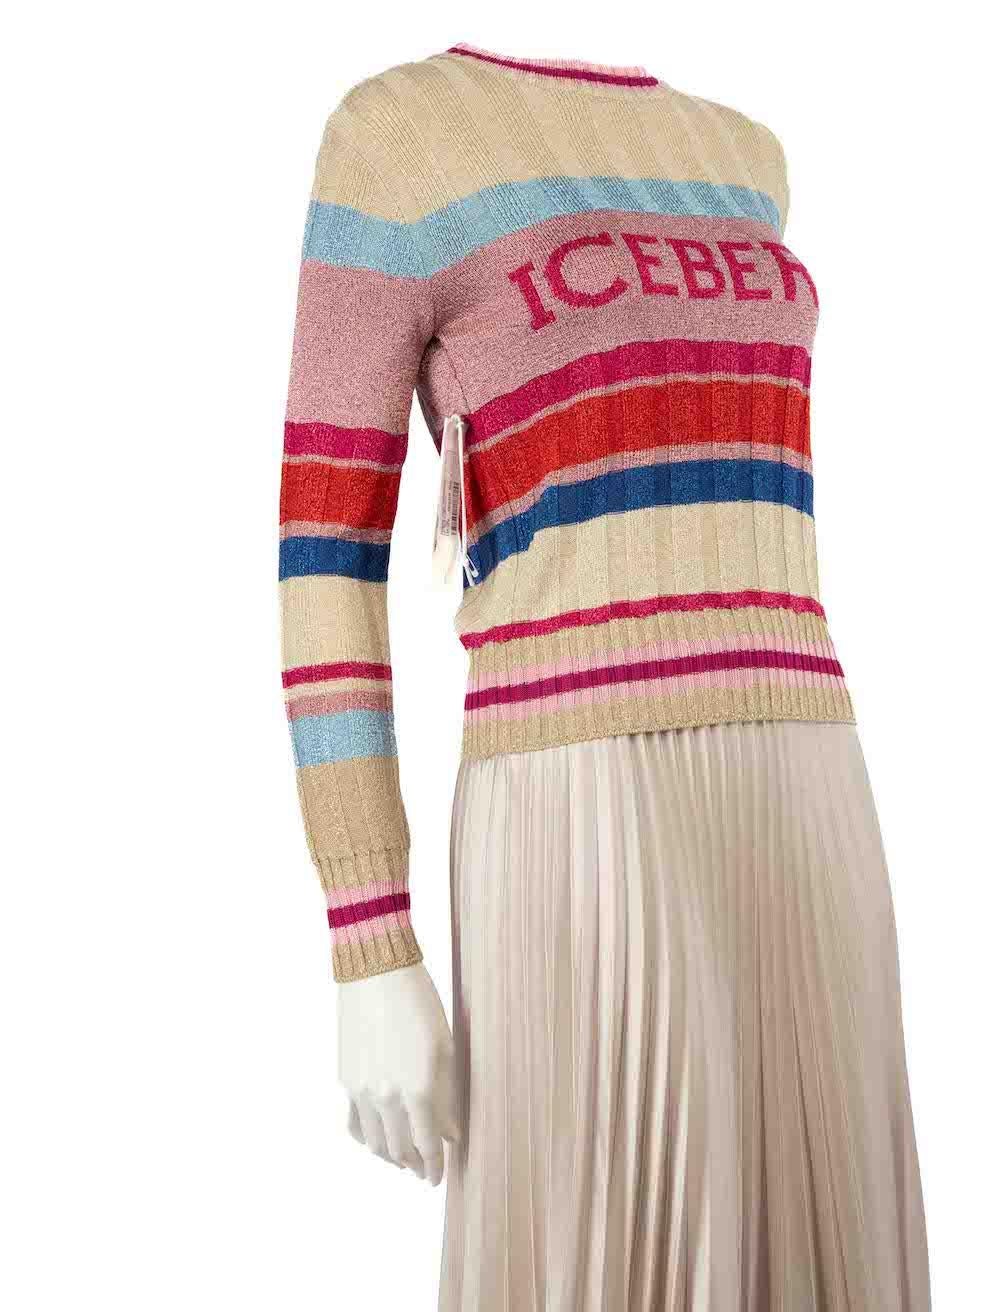 CONDITION is Never worn, with tags. No visible wear to jumper is evident on this new Iceberg designer resale item.
 
 Details
 Multicolour- beige, blue, red, pink
 Viscose
 Knit top
 Striped pattern
 Metallic thread
 Long sleeves
 Round neck
 Logo